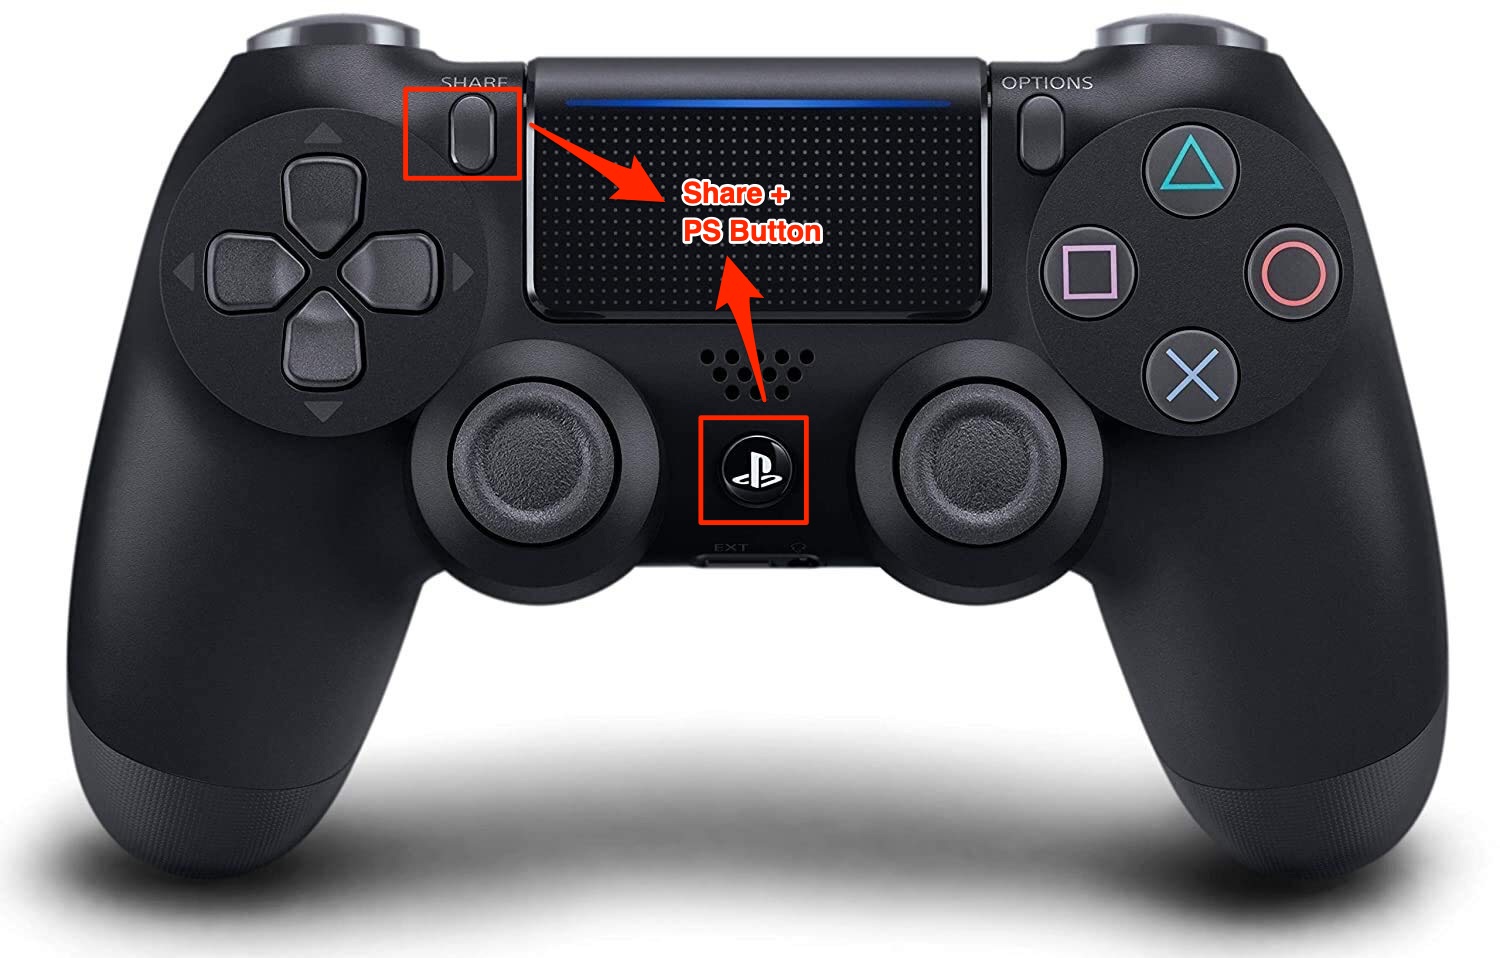 PS button and Share button together